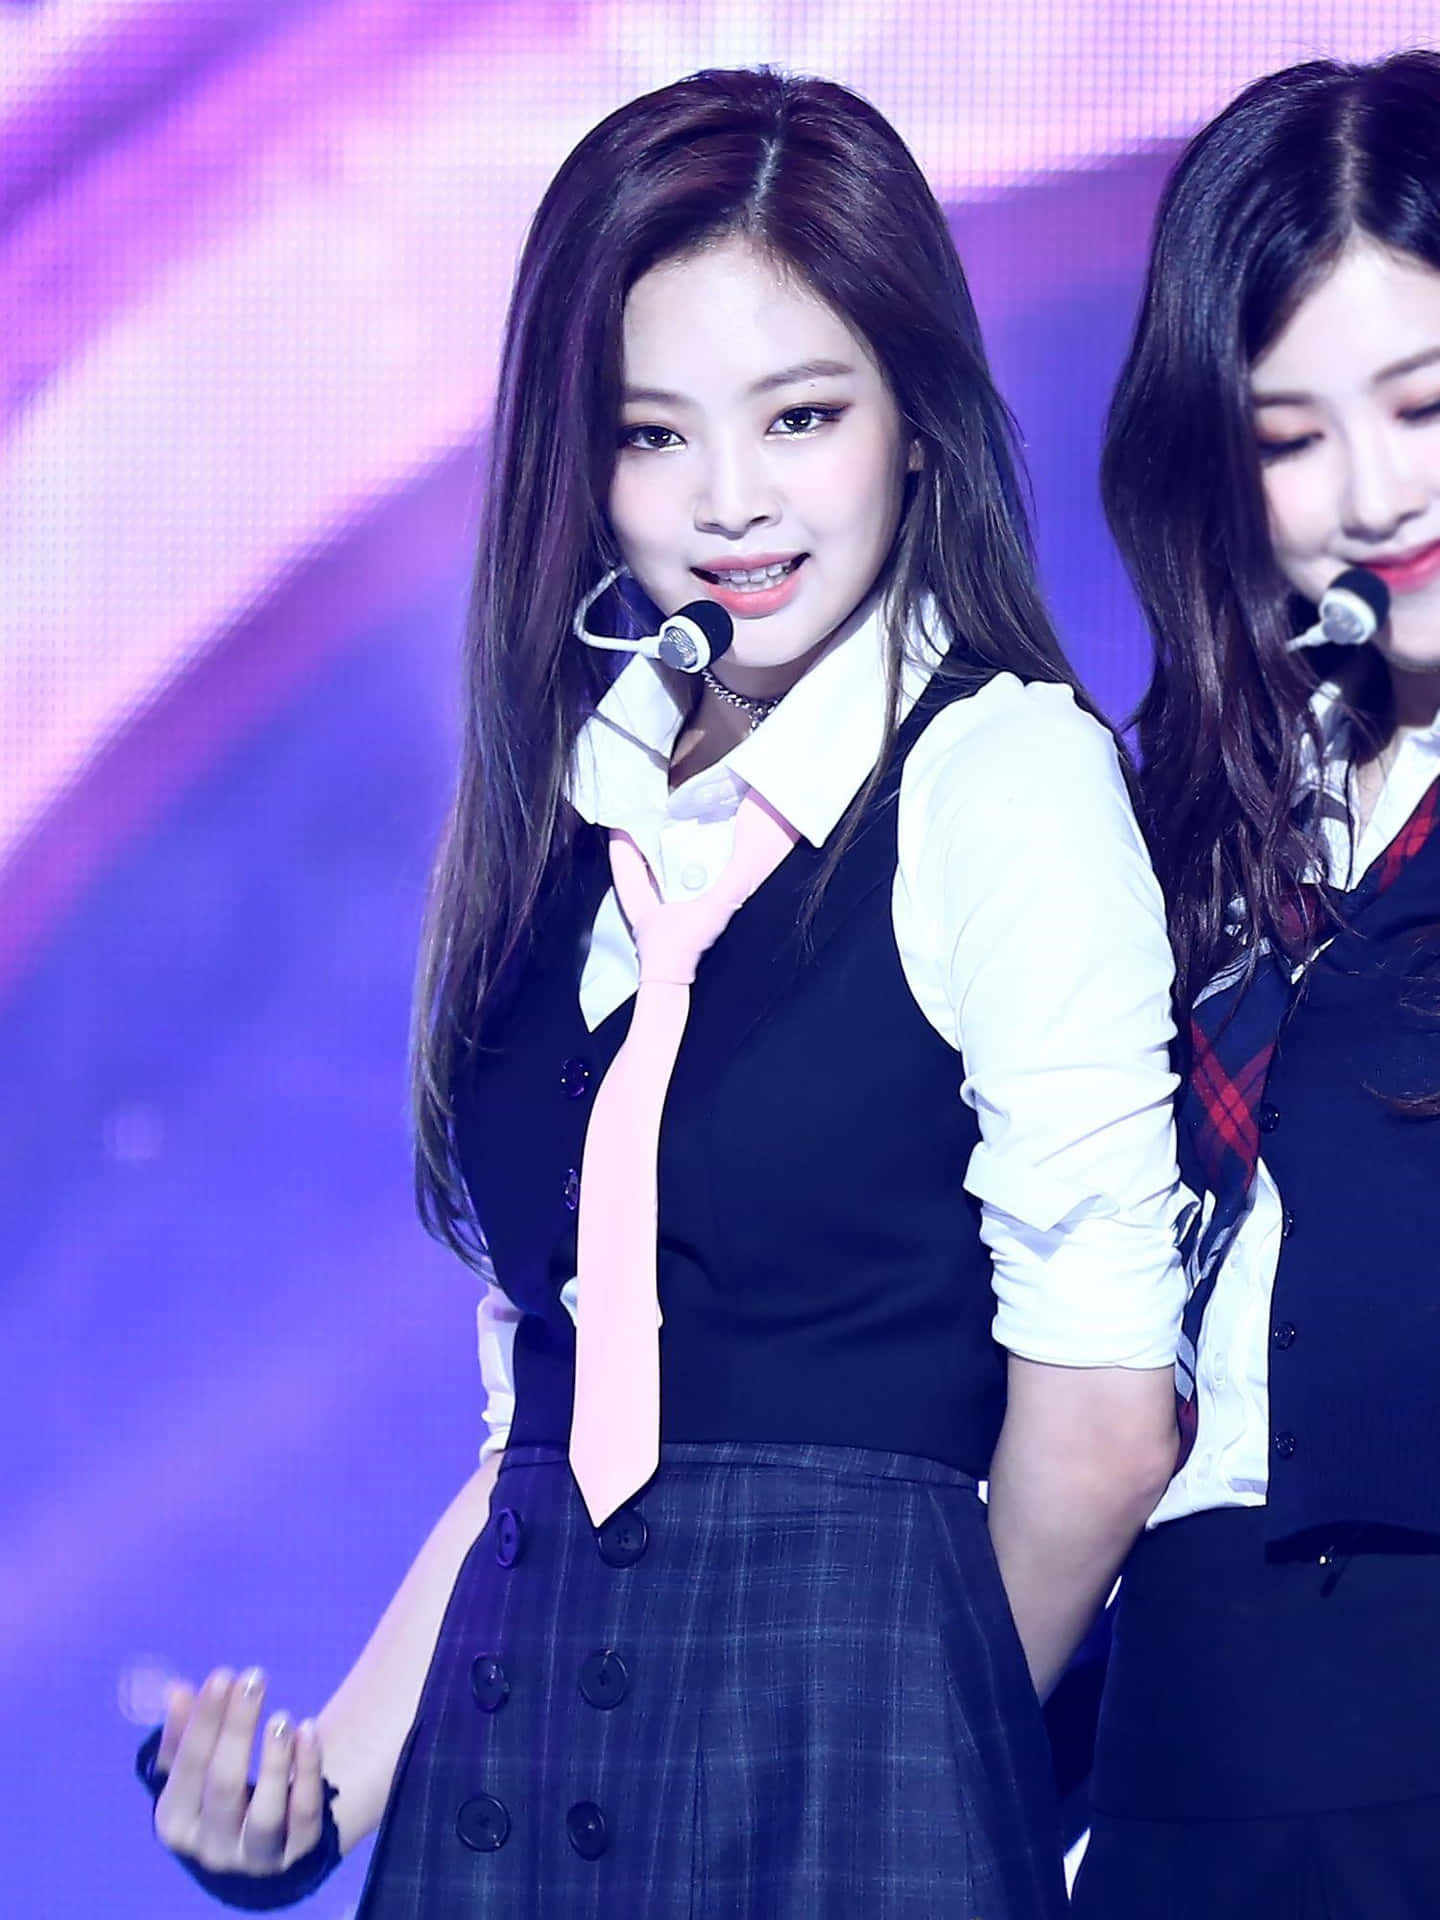 Singer Jennie Kim pictured in a Red Velvet suit